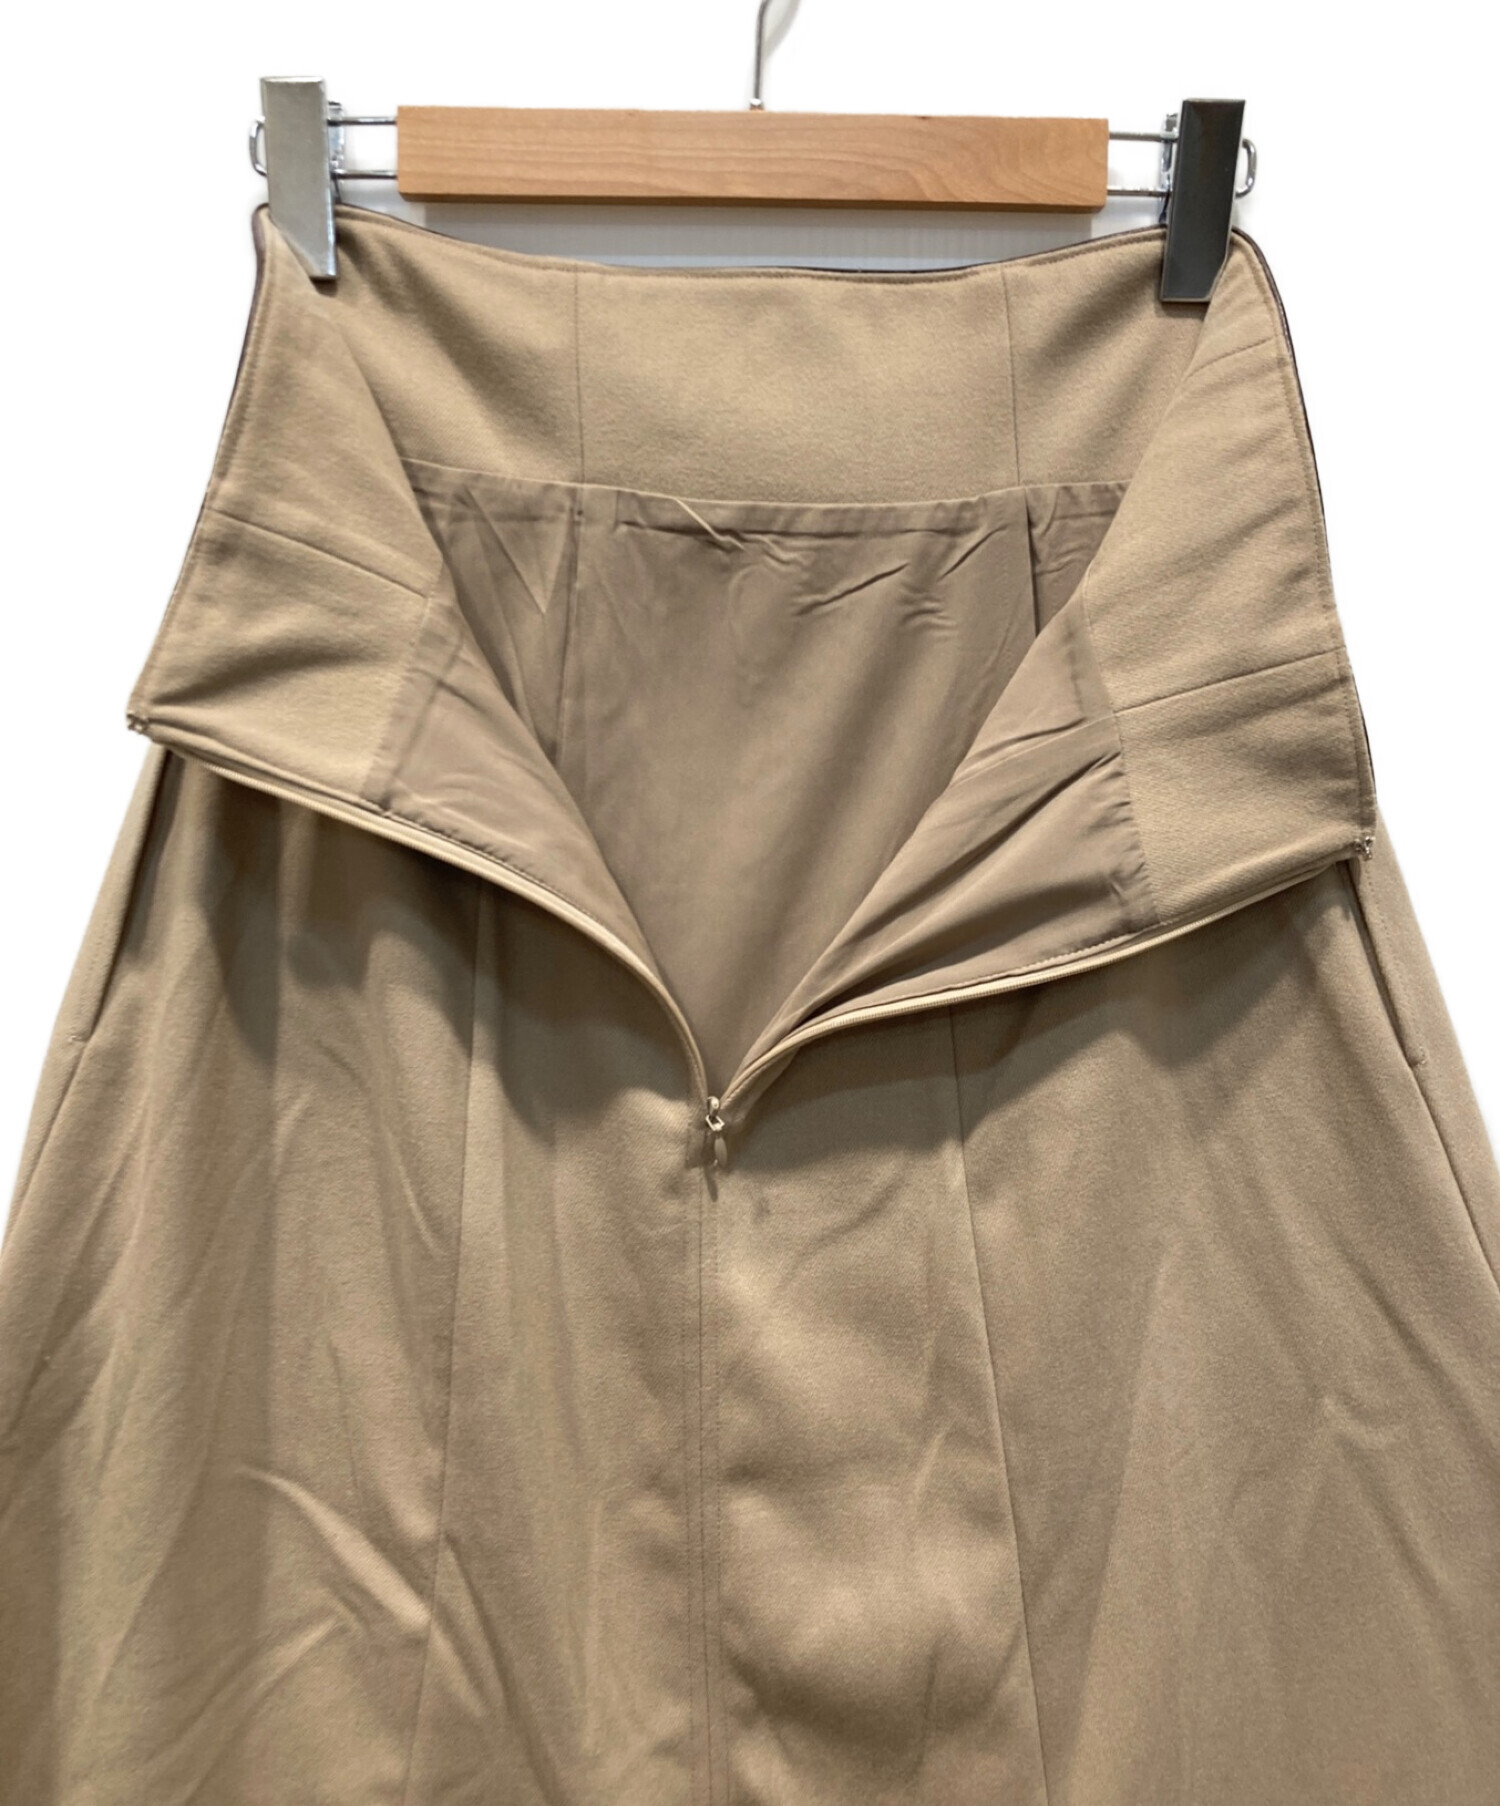 【Her lip to】Belted Trimmed Midi Skirt